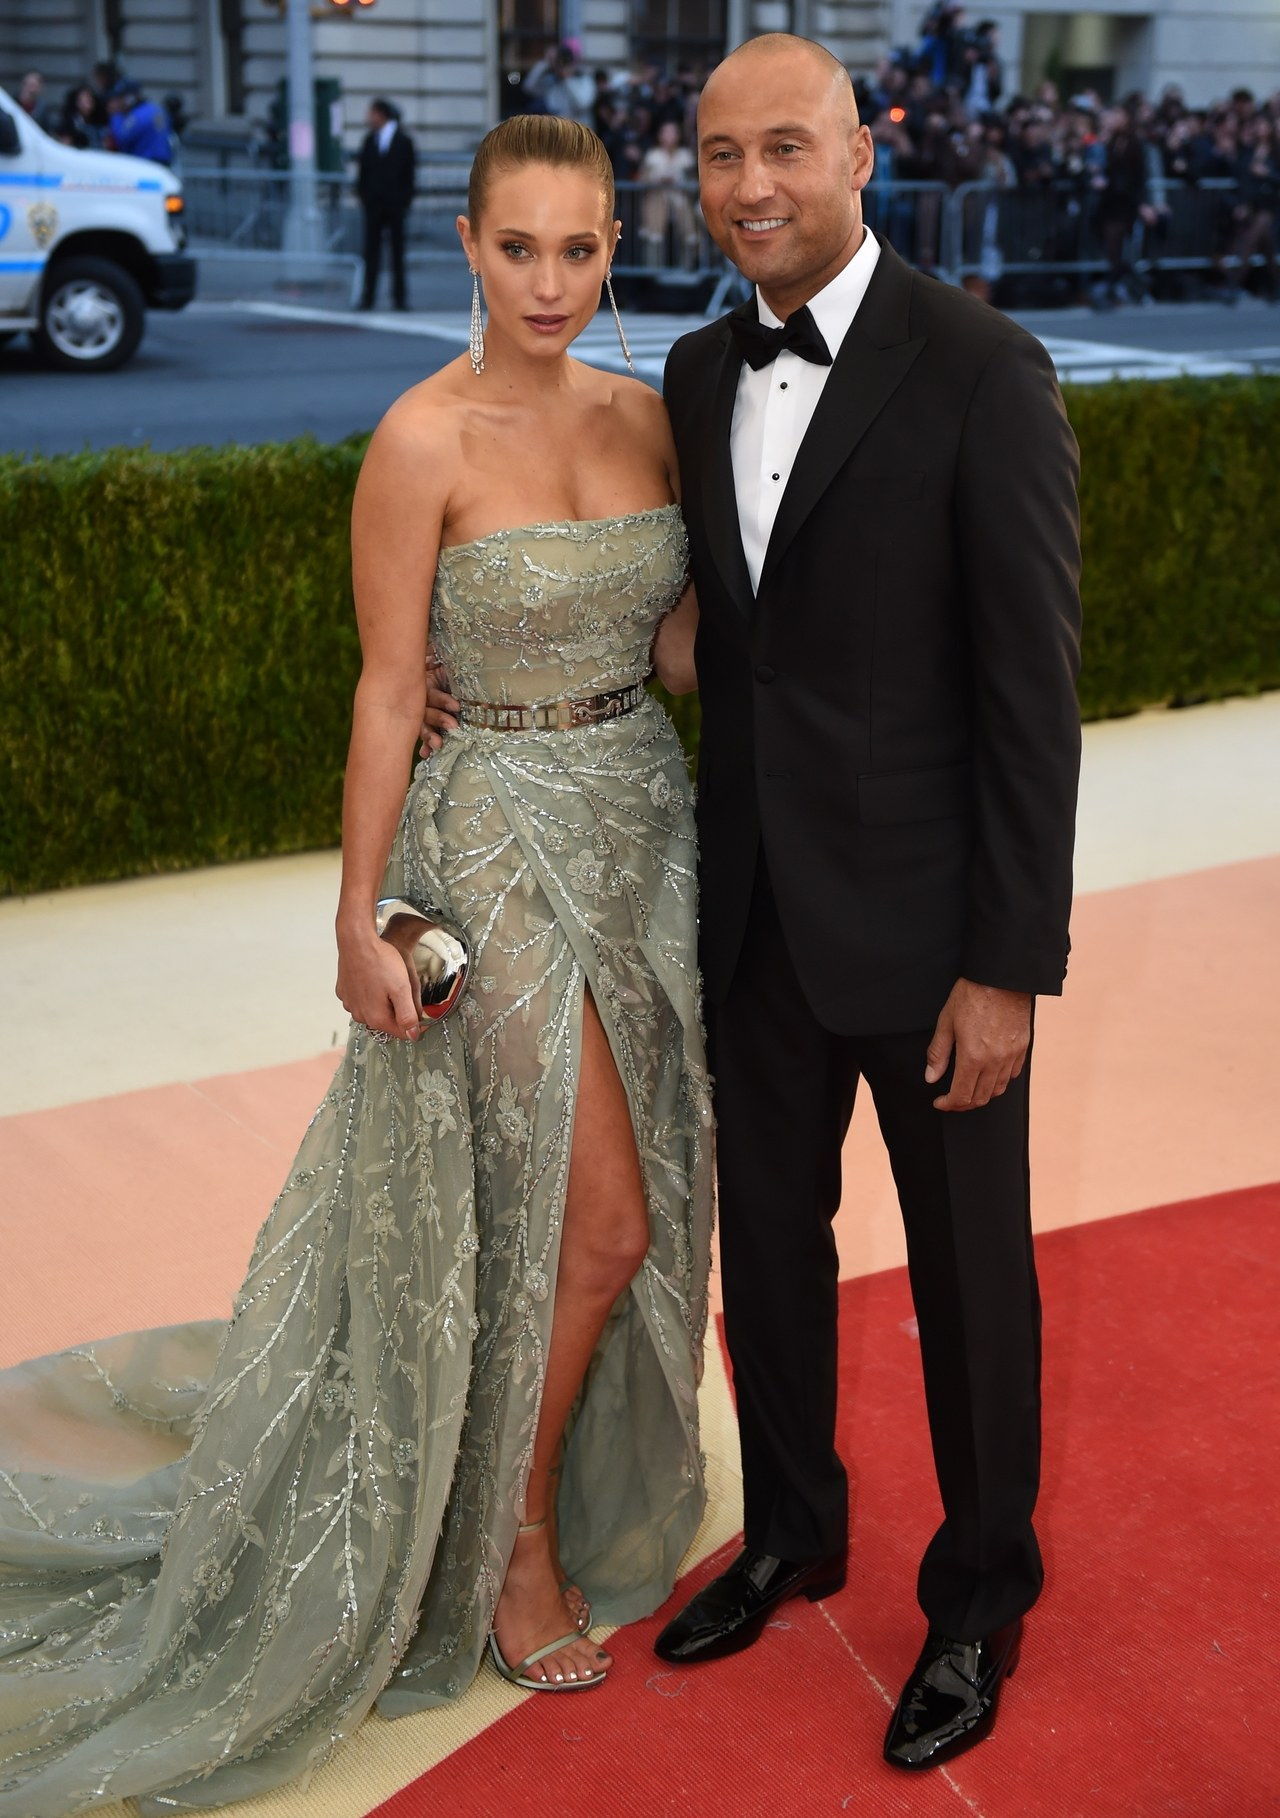 Hannah Davis and Derek Jeter arrive for the Costume Institute Benefit at The Metropolitan Museum of Art May 2, 2016 in New York. / AFP / TIMOTHY A. CLARY (Photo credit should read TIMOTHY A. CLARY/AFP/Getty Images)